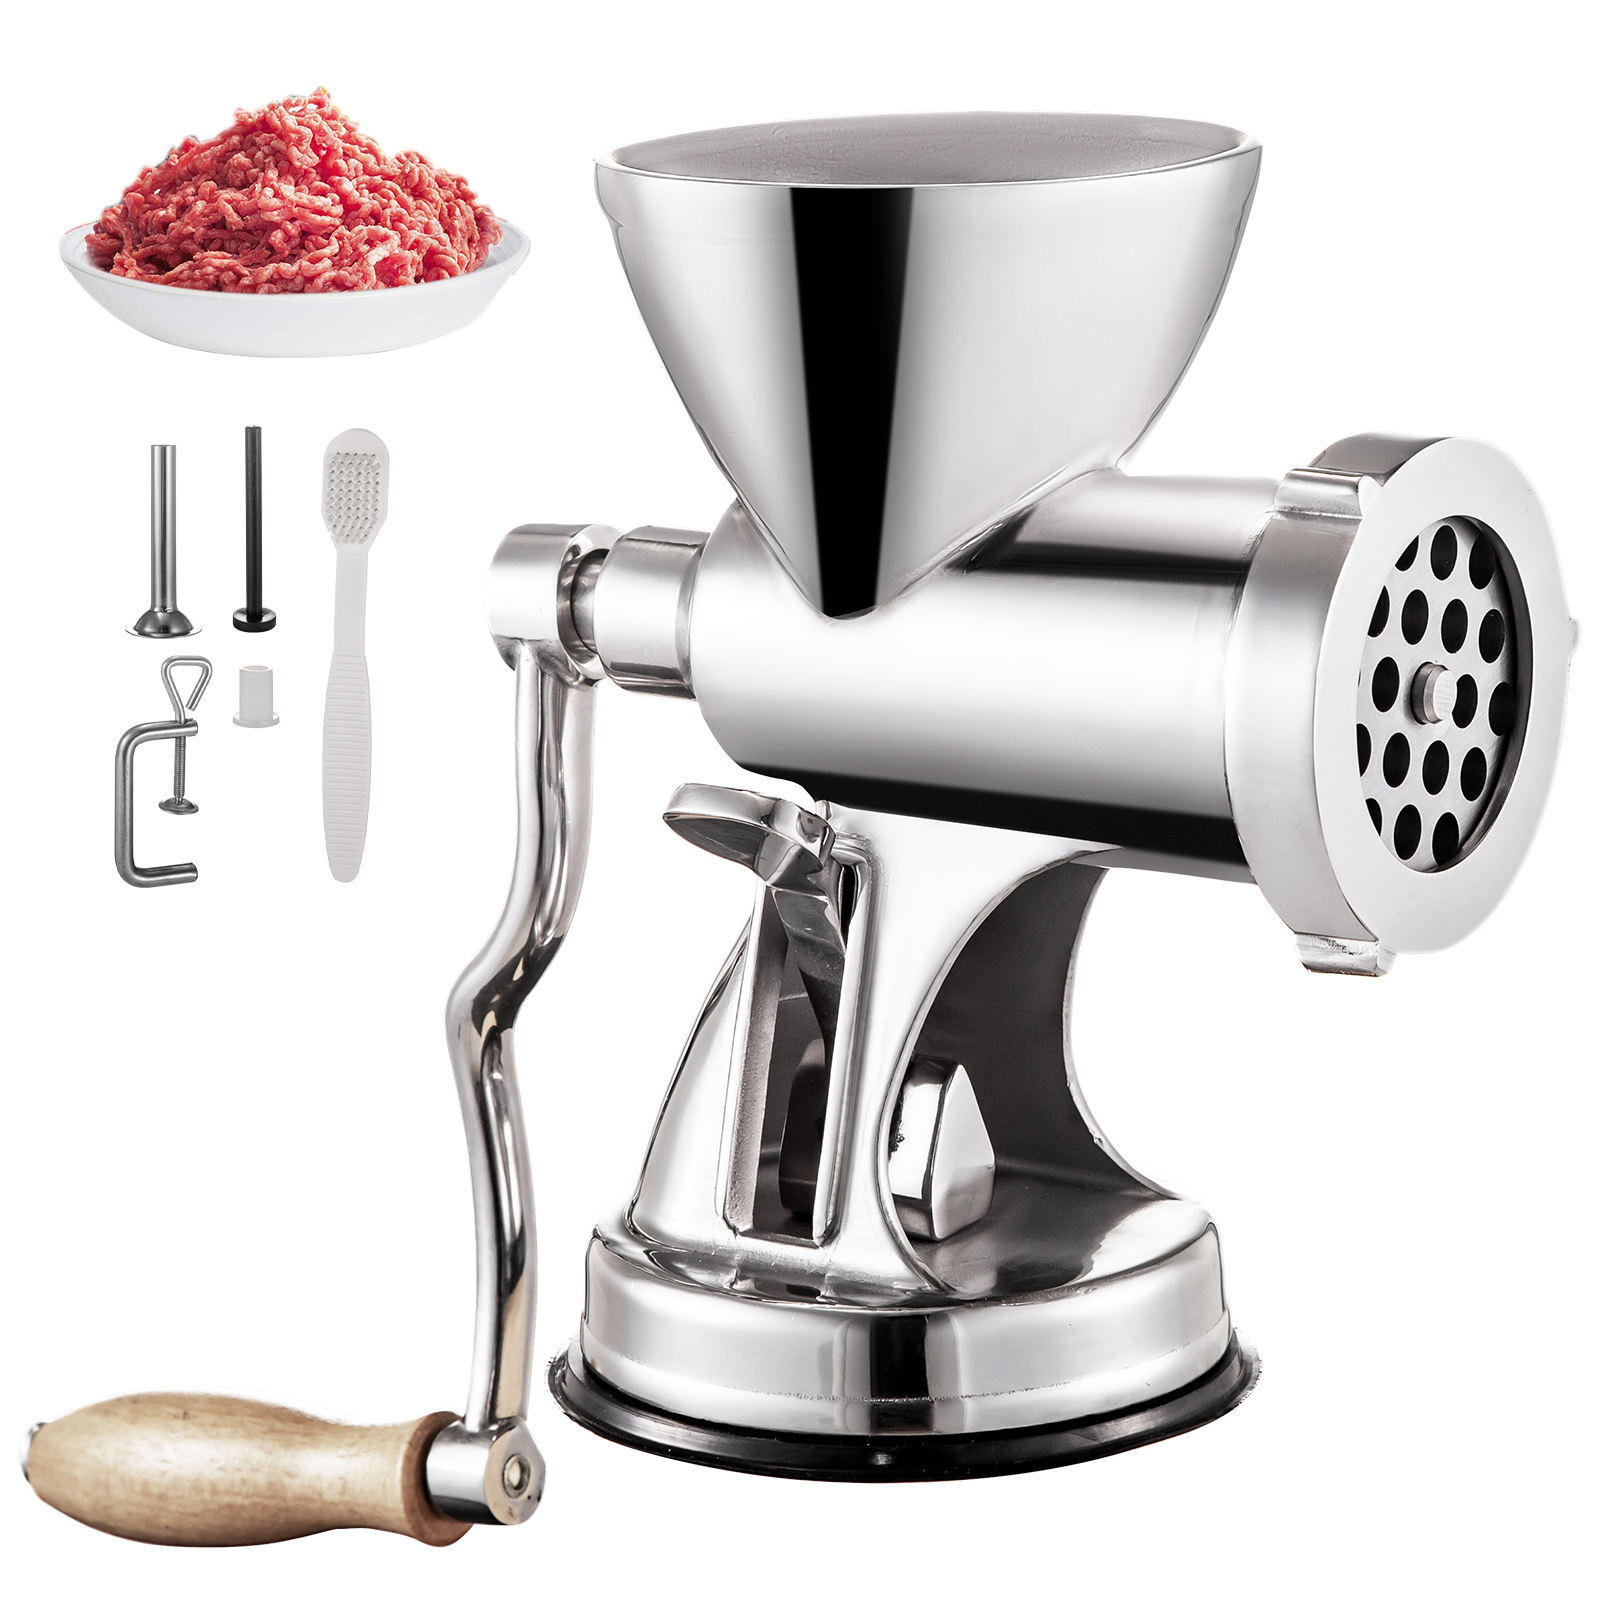 Garlic Fruits etc Vegetables Manual Meat Grinder Stainless Steel Blades Heavy Duty with Powerful Suction Base for Home Kitchen Fast and Effortless for All Meats 